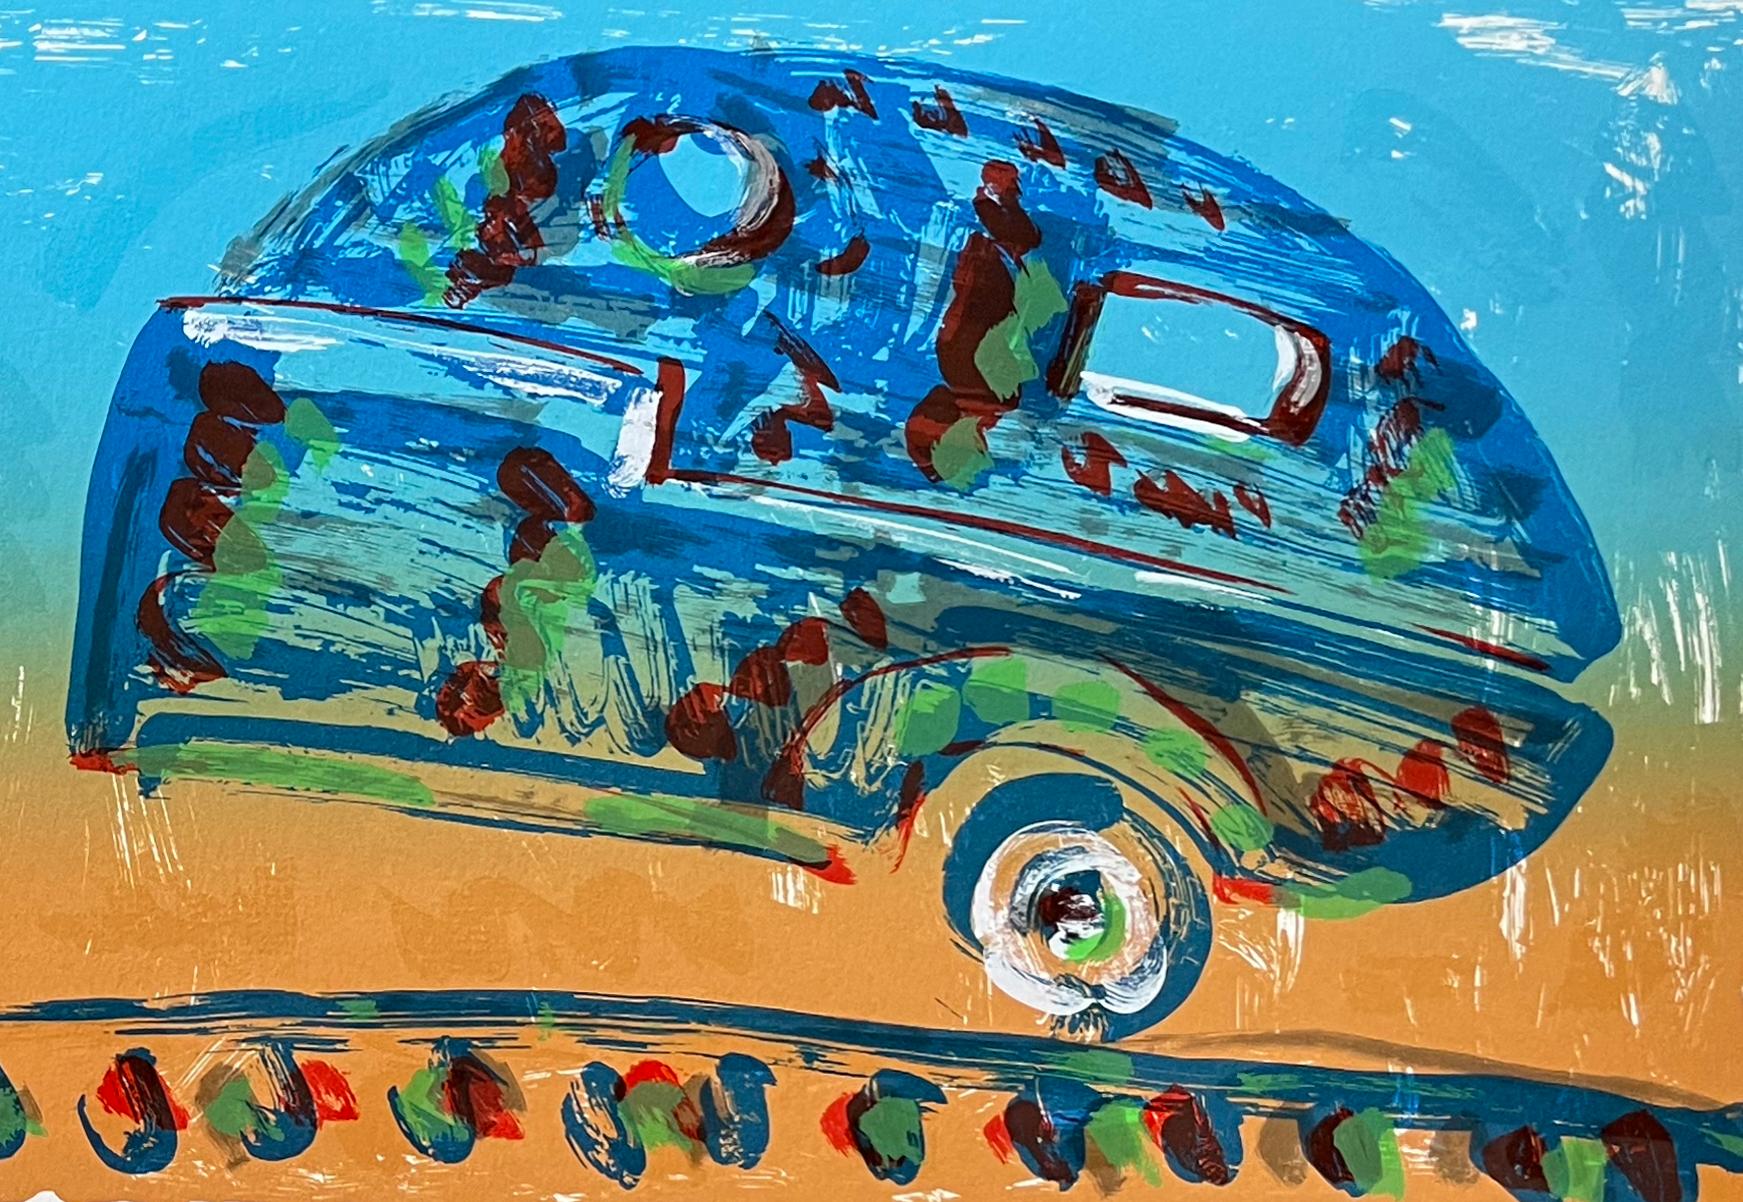 Signed, titled and numbered by the artist.  Created as a fundraiser for the Sidestreet Project in Pasadena, CA. 
Cars are a frequent subject in a lot of Chicano art, and Frank Romero has made several famous images on the theme. This is a signed and